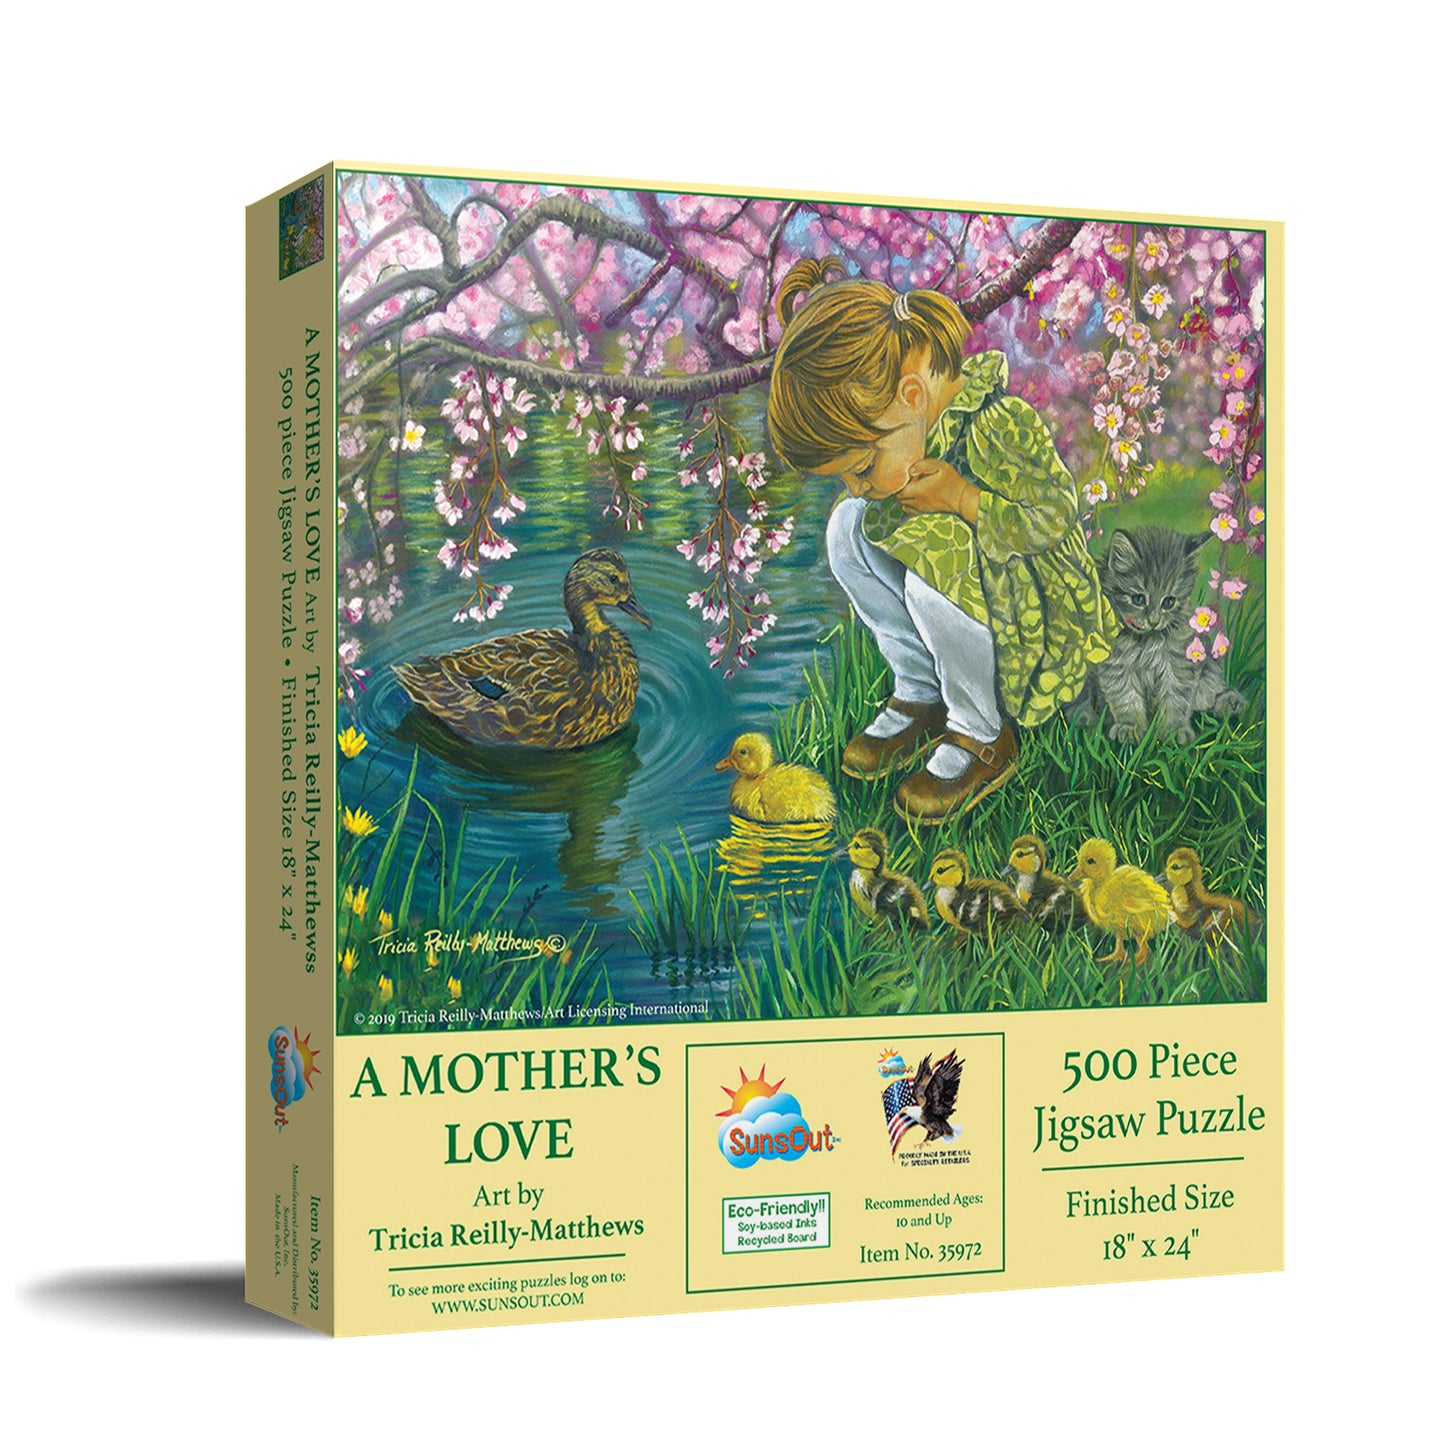 A Mother's Love - 500 Piece Jigsaw Puzzle